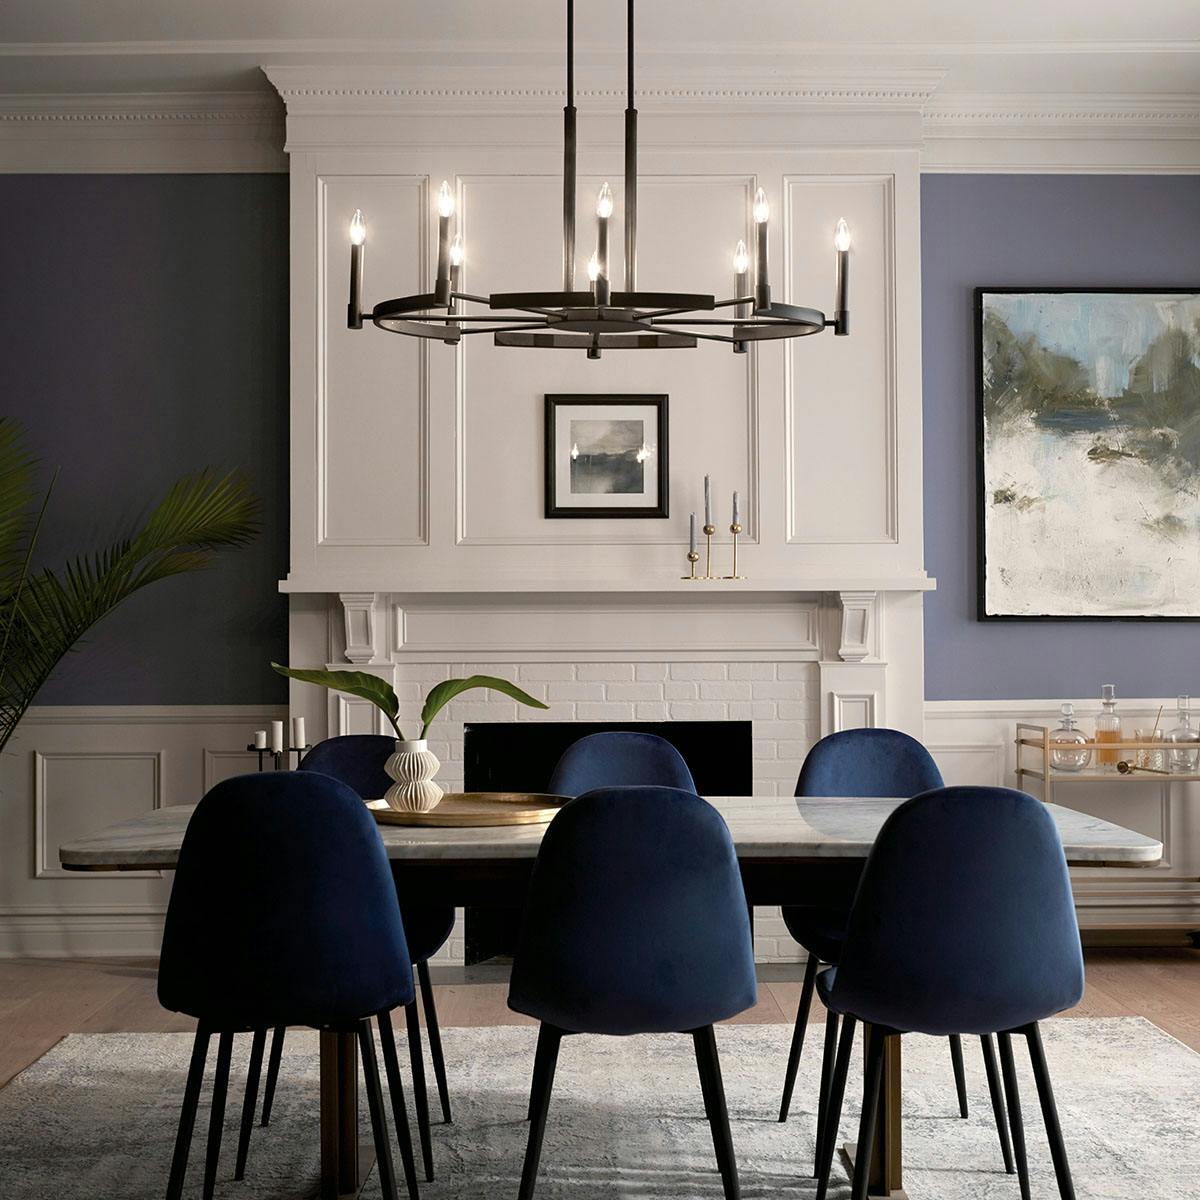 Day time Dining Room image featuring Tolani chandelier 52429BK